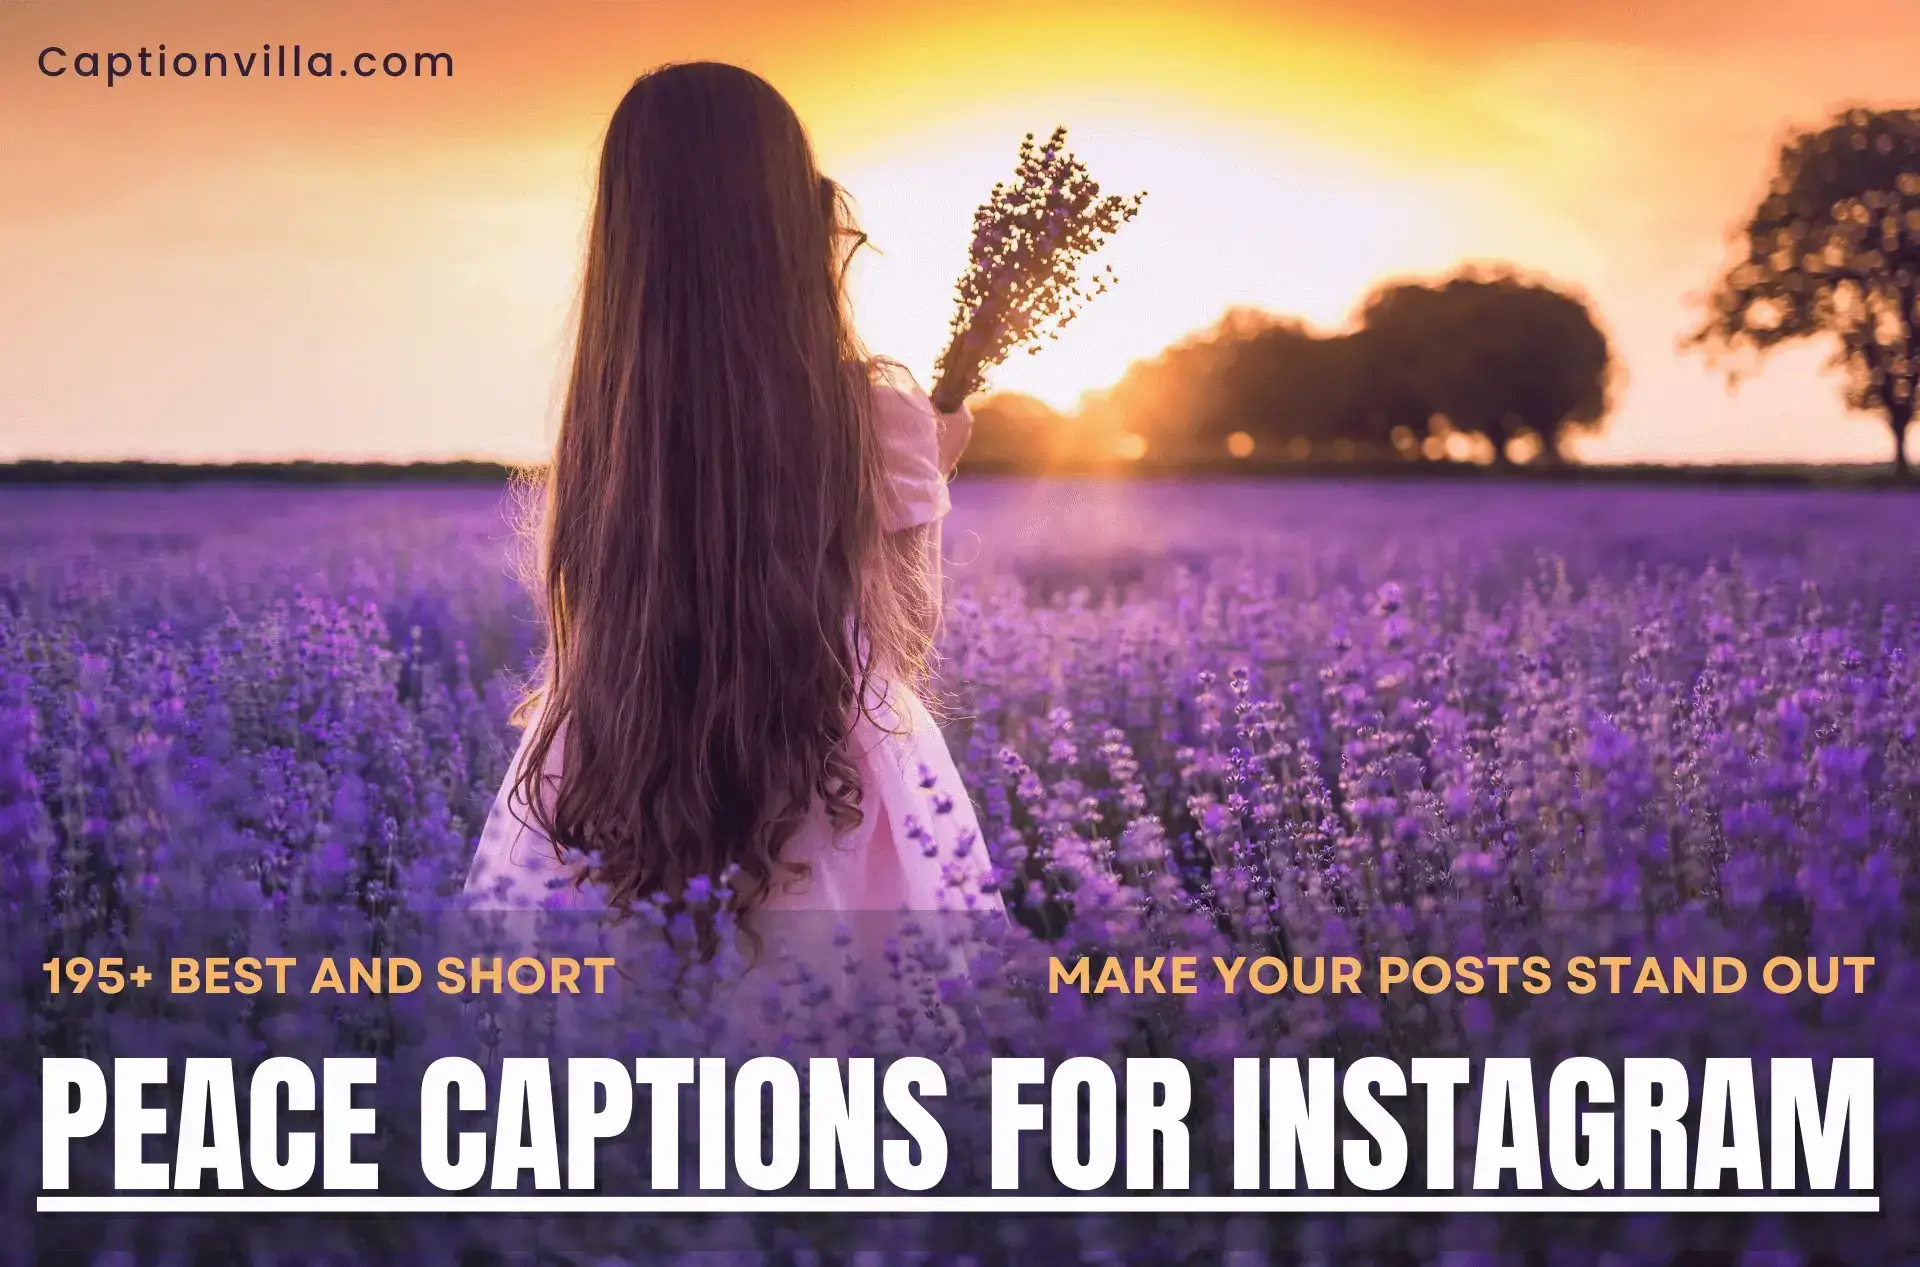 A girl in the blossom in purple dress and having a peace caption for Instagram.